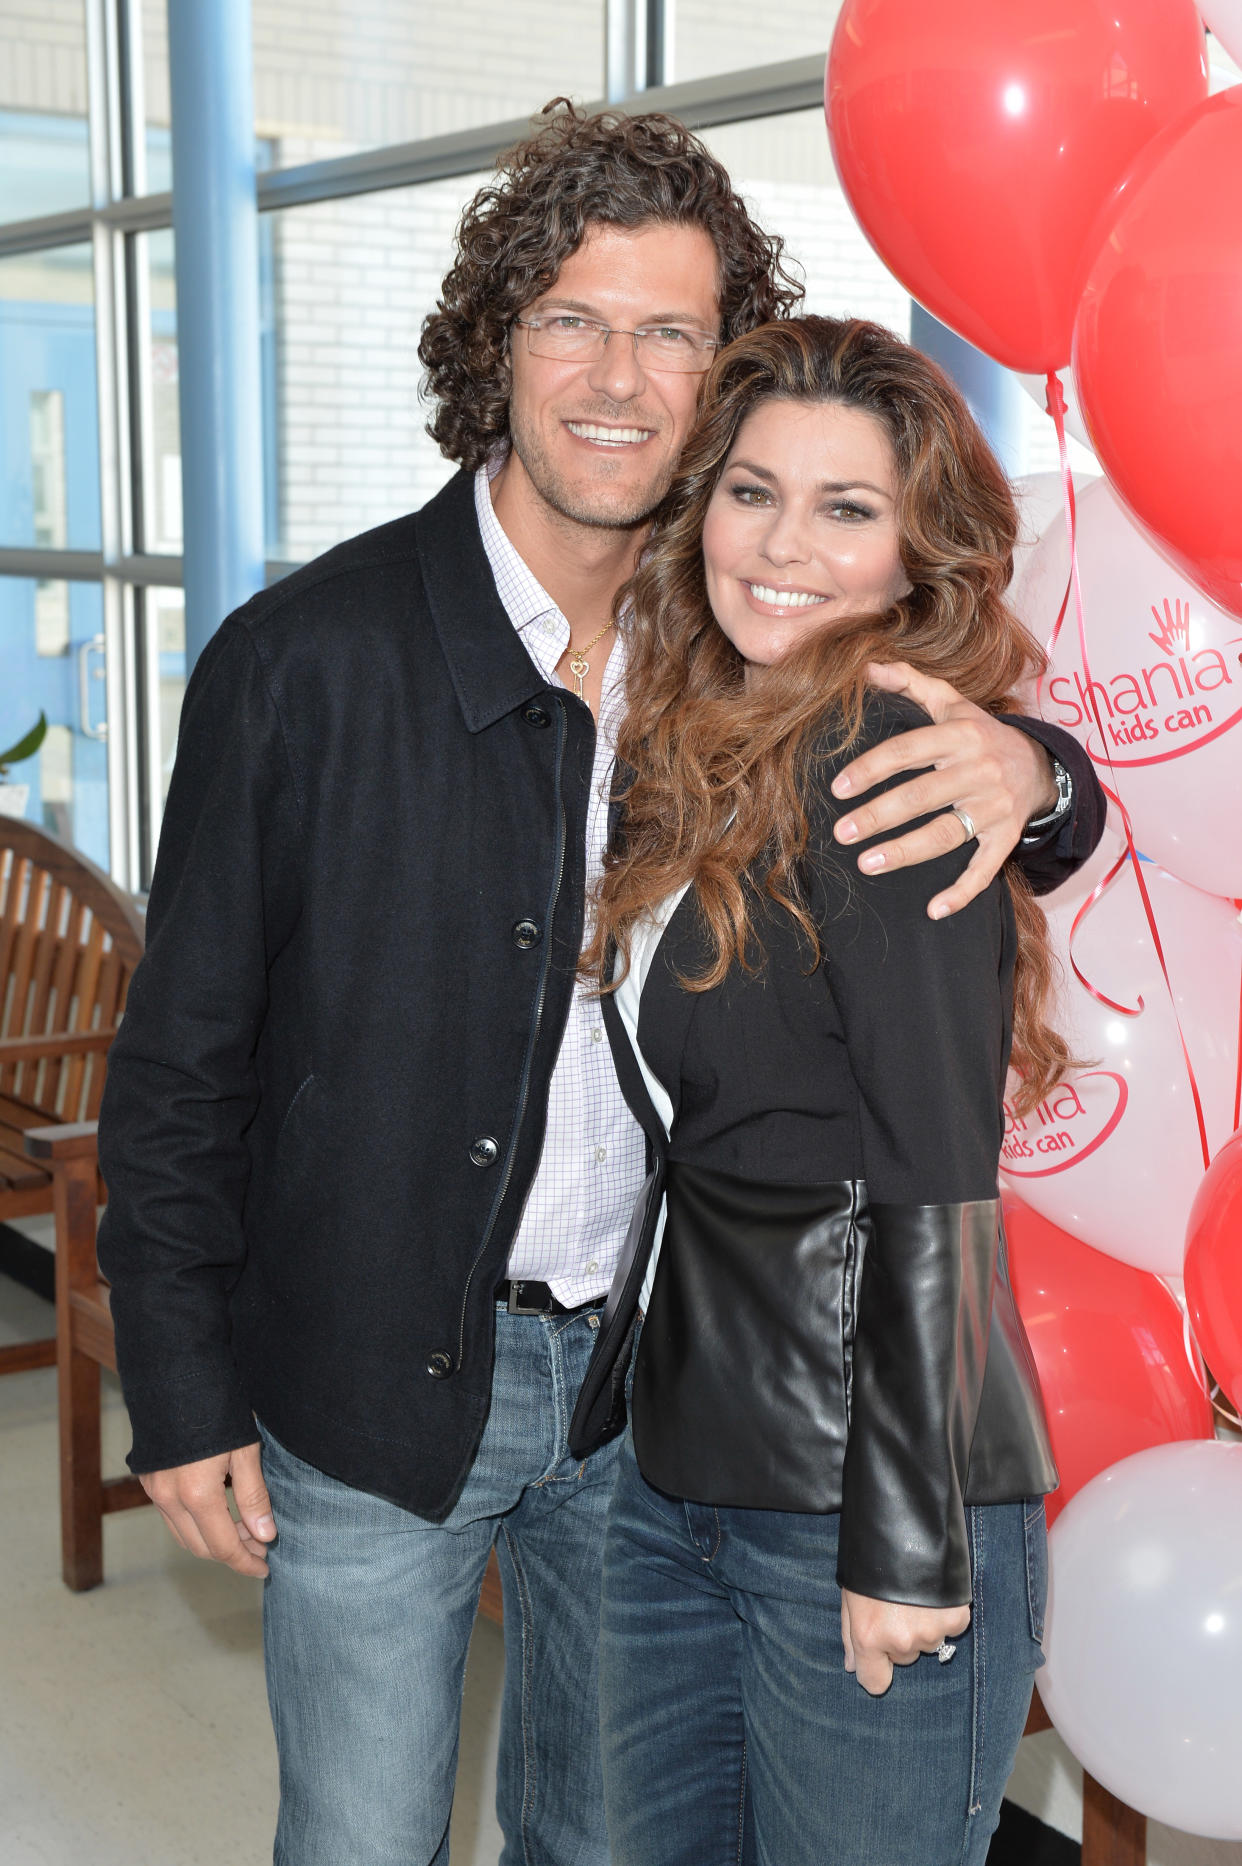 Frederic Thiebaud and Shania Twain attend the 3rd Annual Bliss Ball presented by the The Dilawri Foundation held at Fort York on September 20, 2014 in Toronto, Canada.